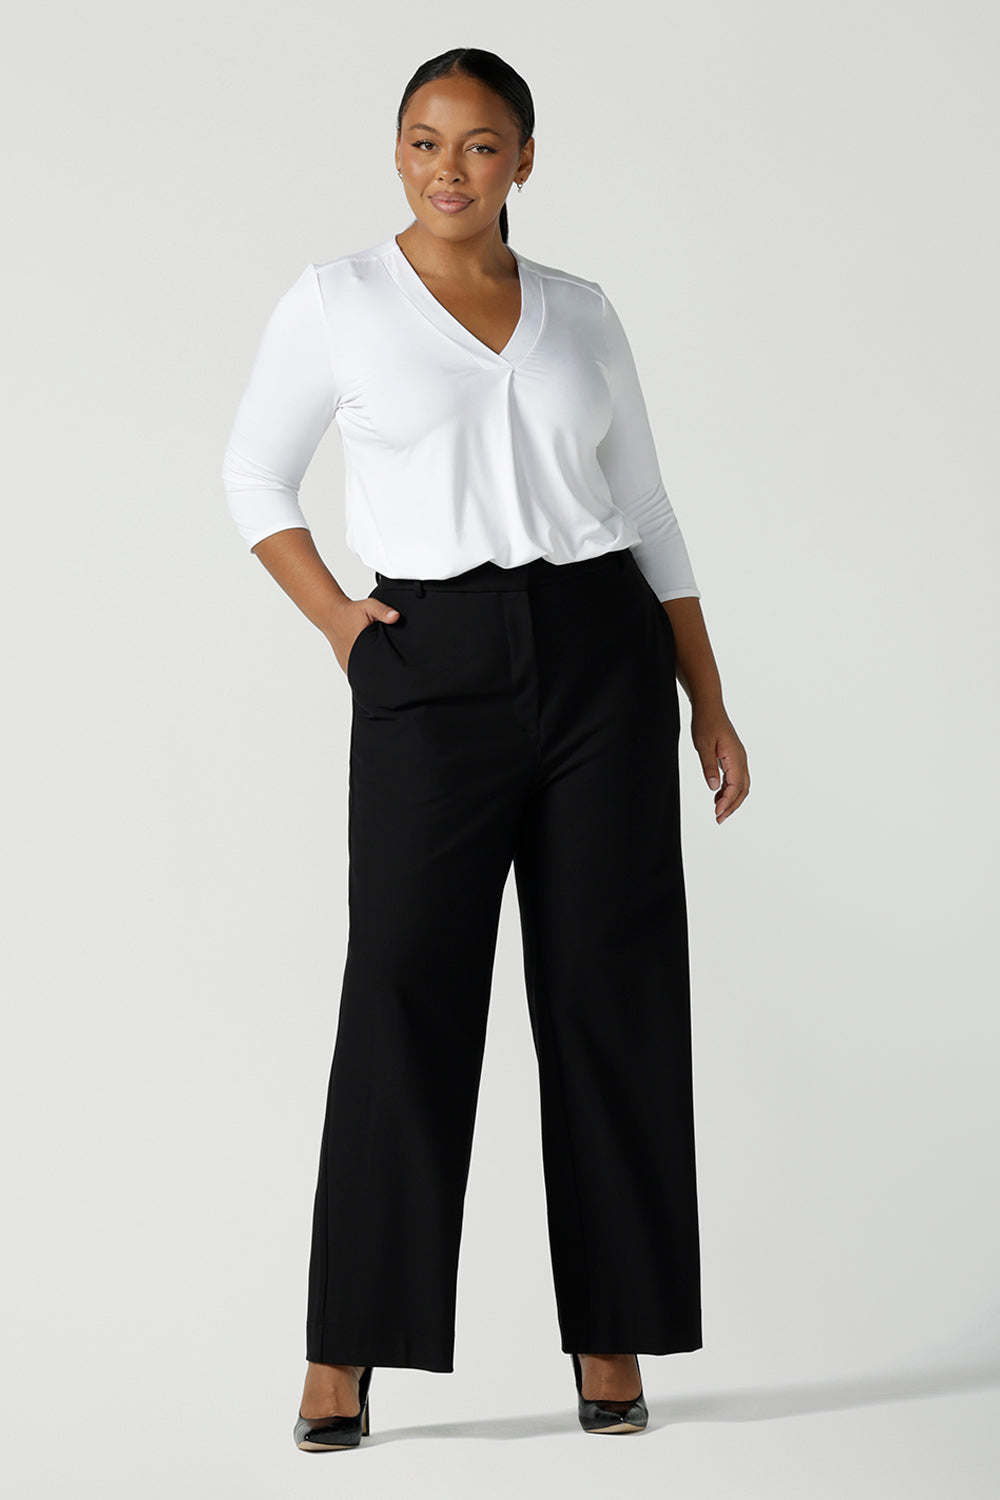 A size 16 curvy women wears the Kade pant in Black. A high waist pant in technical stretch ponte. High waisted design with belt loops, pockets and fly front detail. Made in Australia for women size 8 - 24.